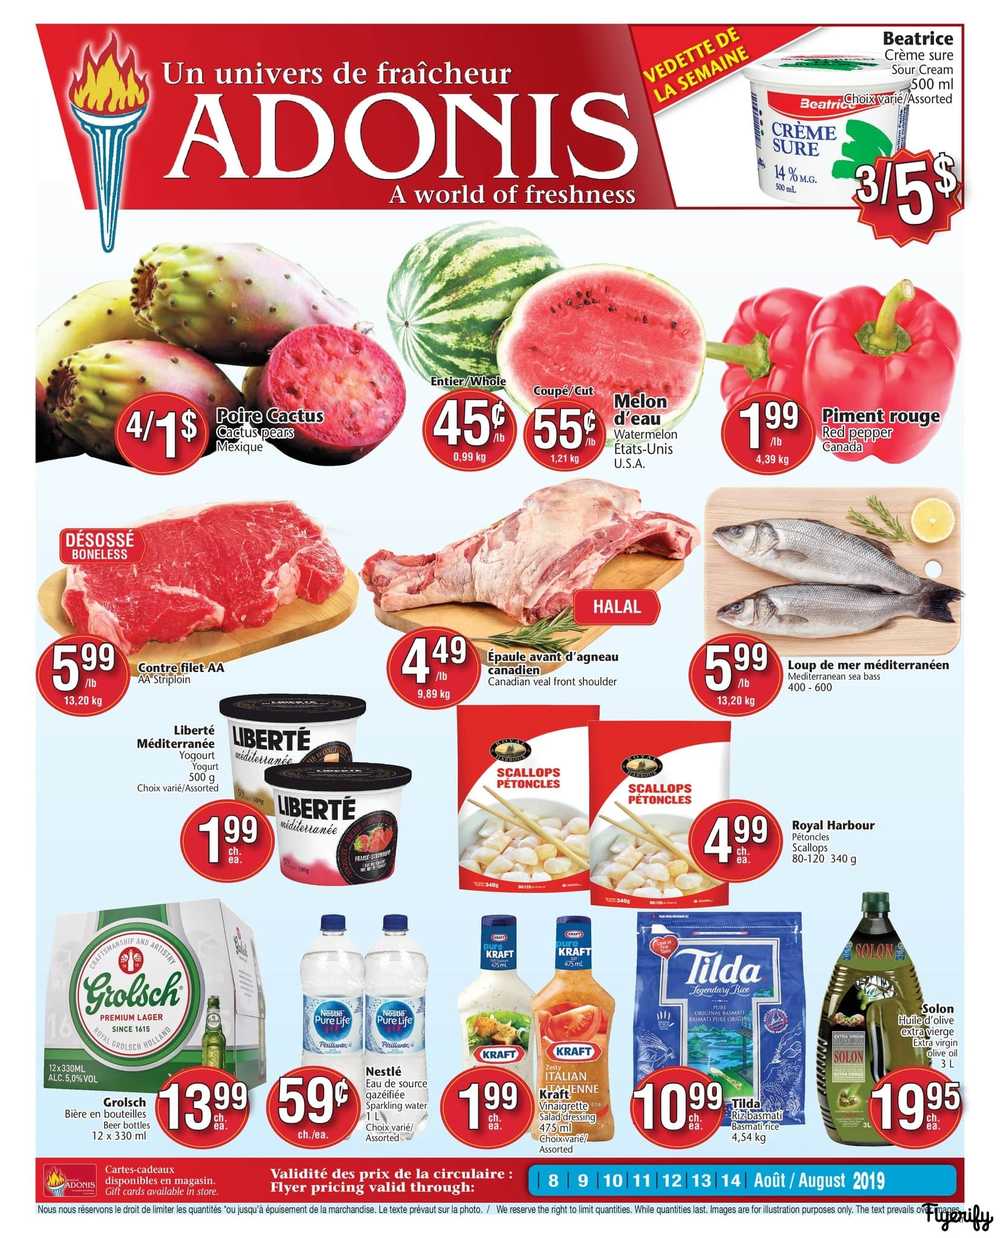 Adonis Quebec - Marche Adonis (QC) Flyer May 23 to 29 Canada